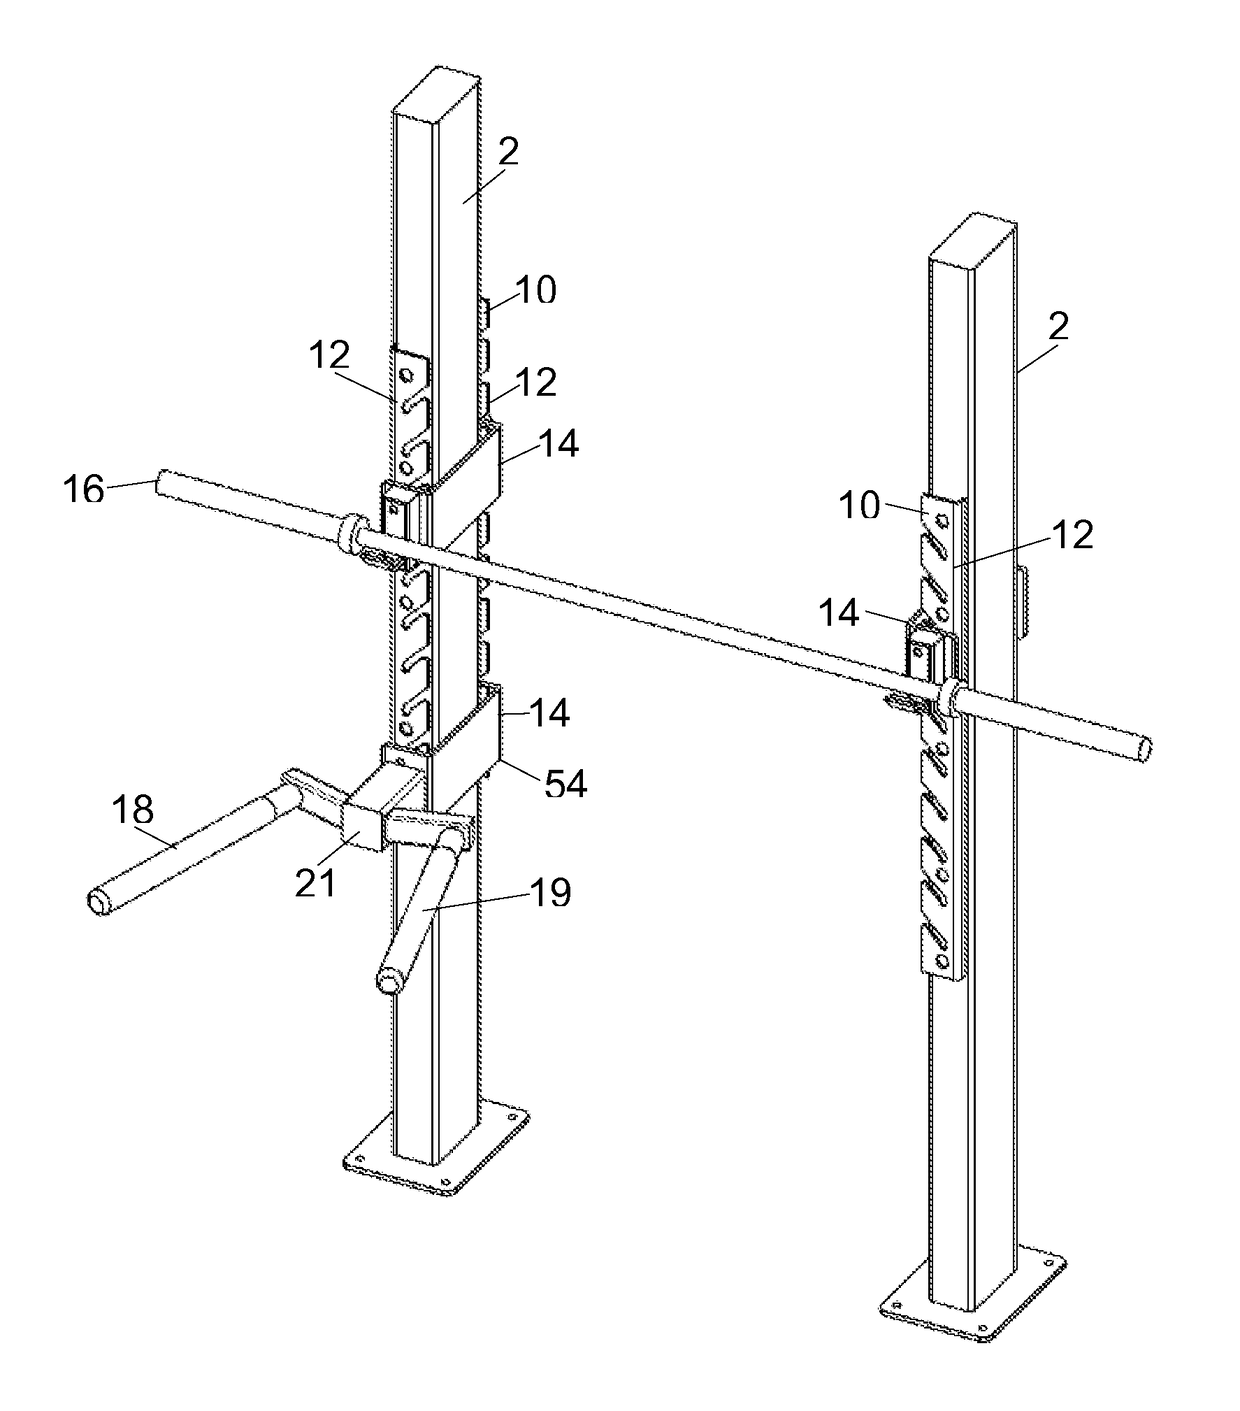 Support apparatus for an exercise device